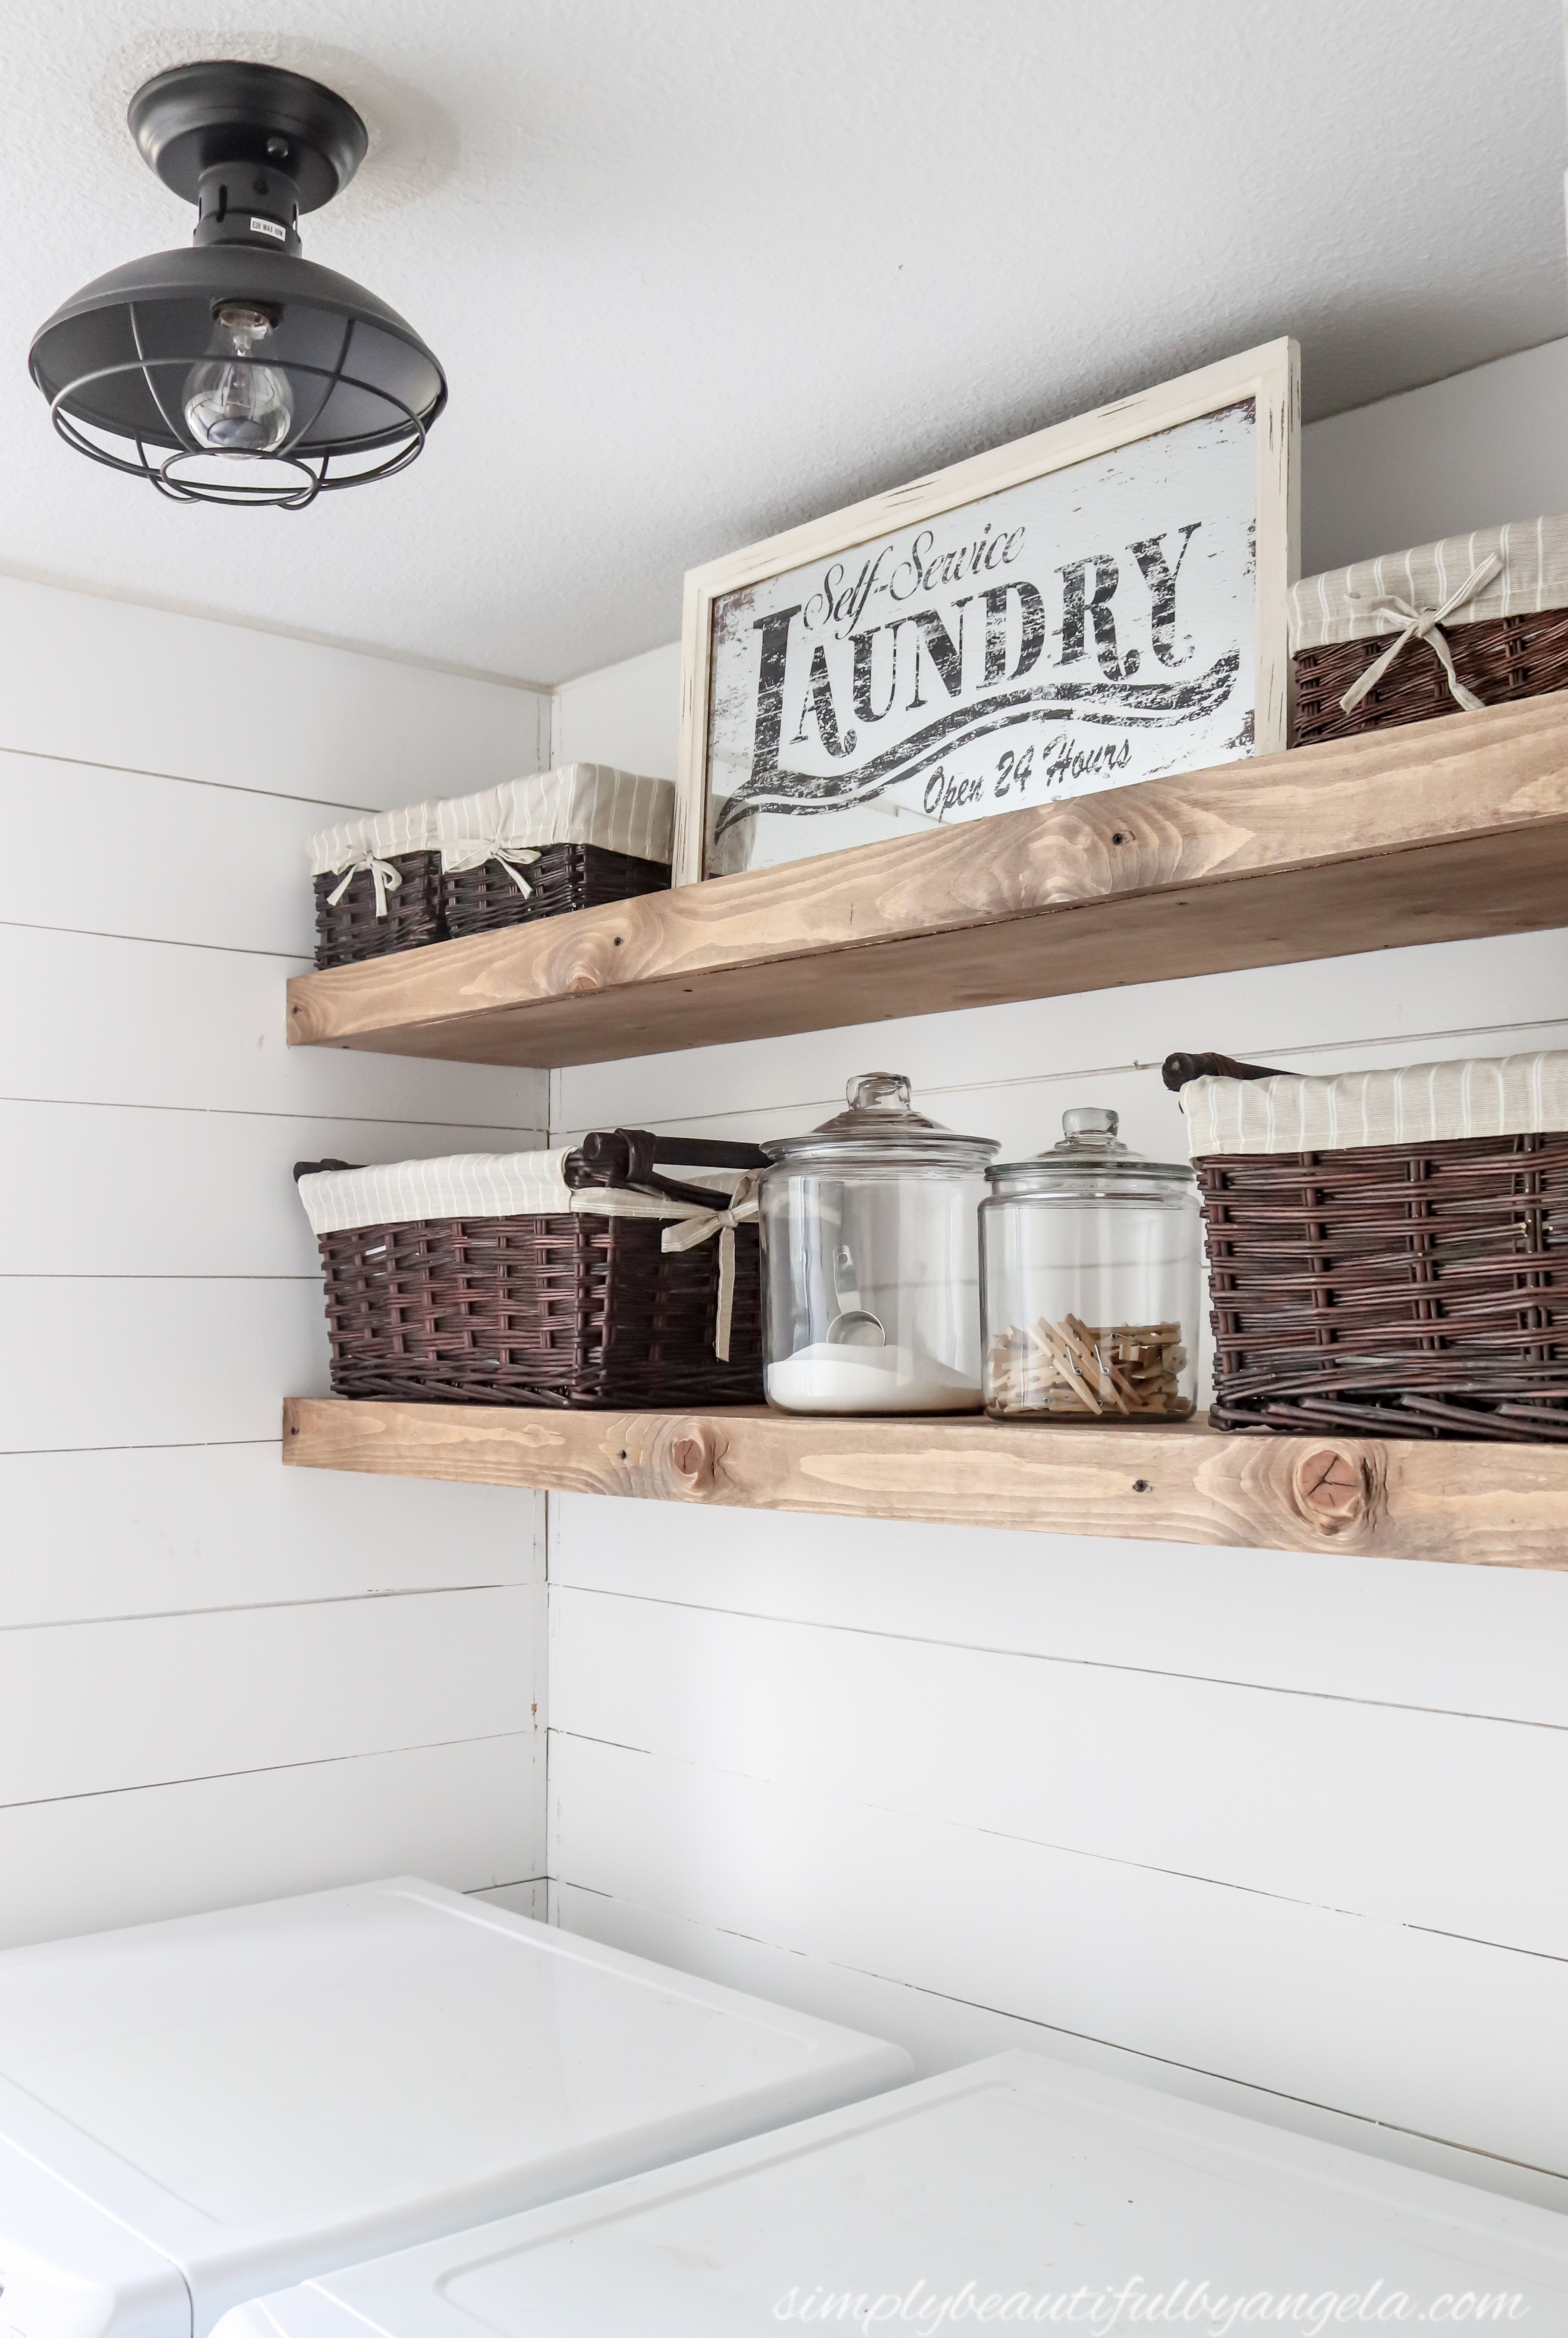 diy rustic farmhouse laundry room shelves simply beautiful angela floating quick reminder how empty this space felt before the went compared after generator adapter wall mount